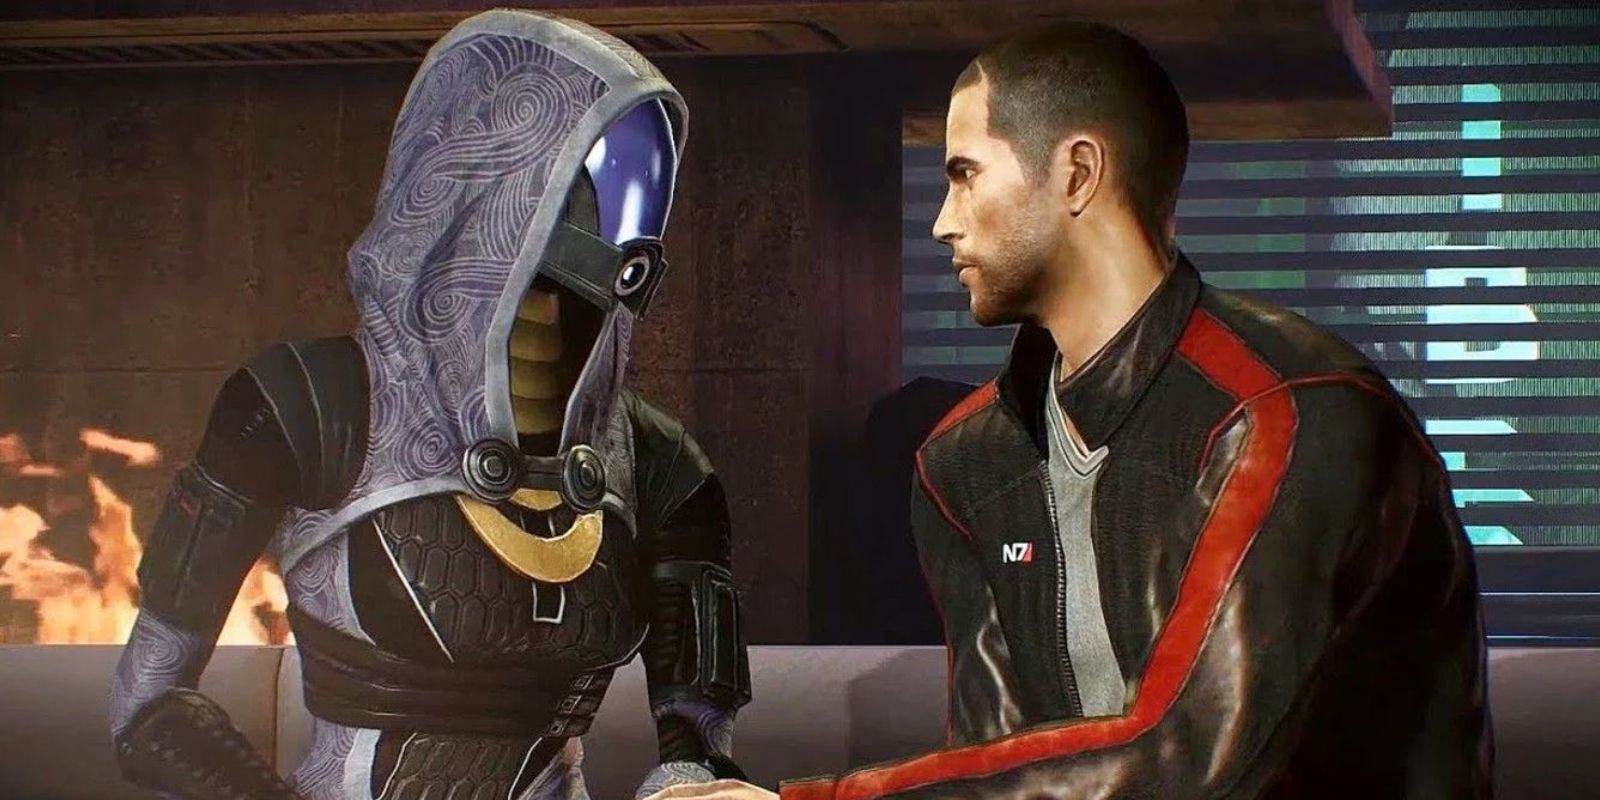 An image of Tali staring at Male Shepard.